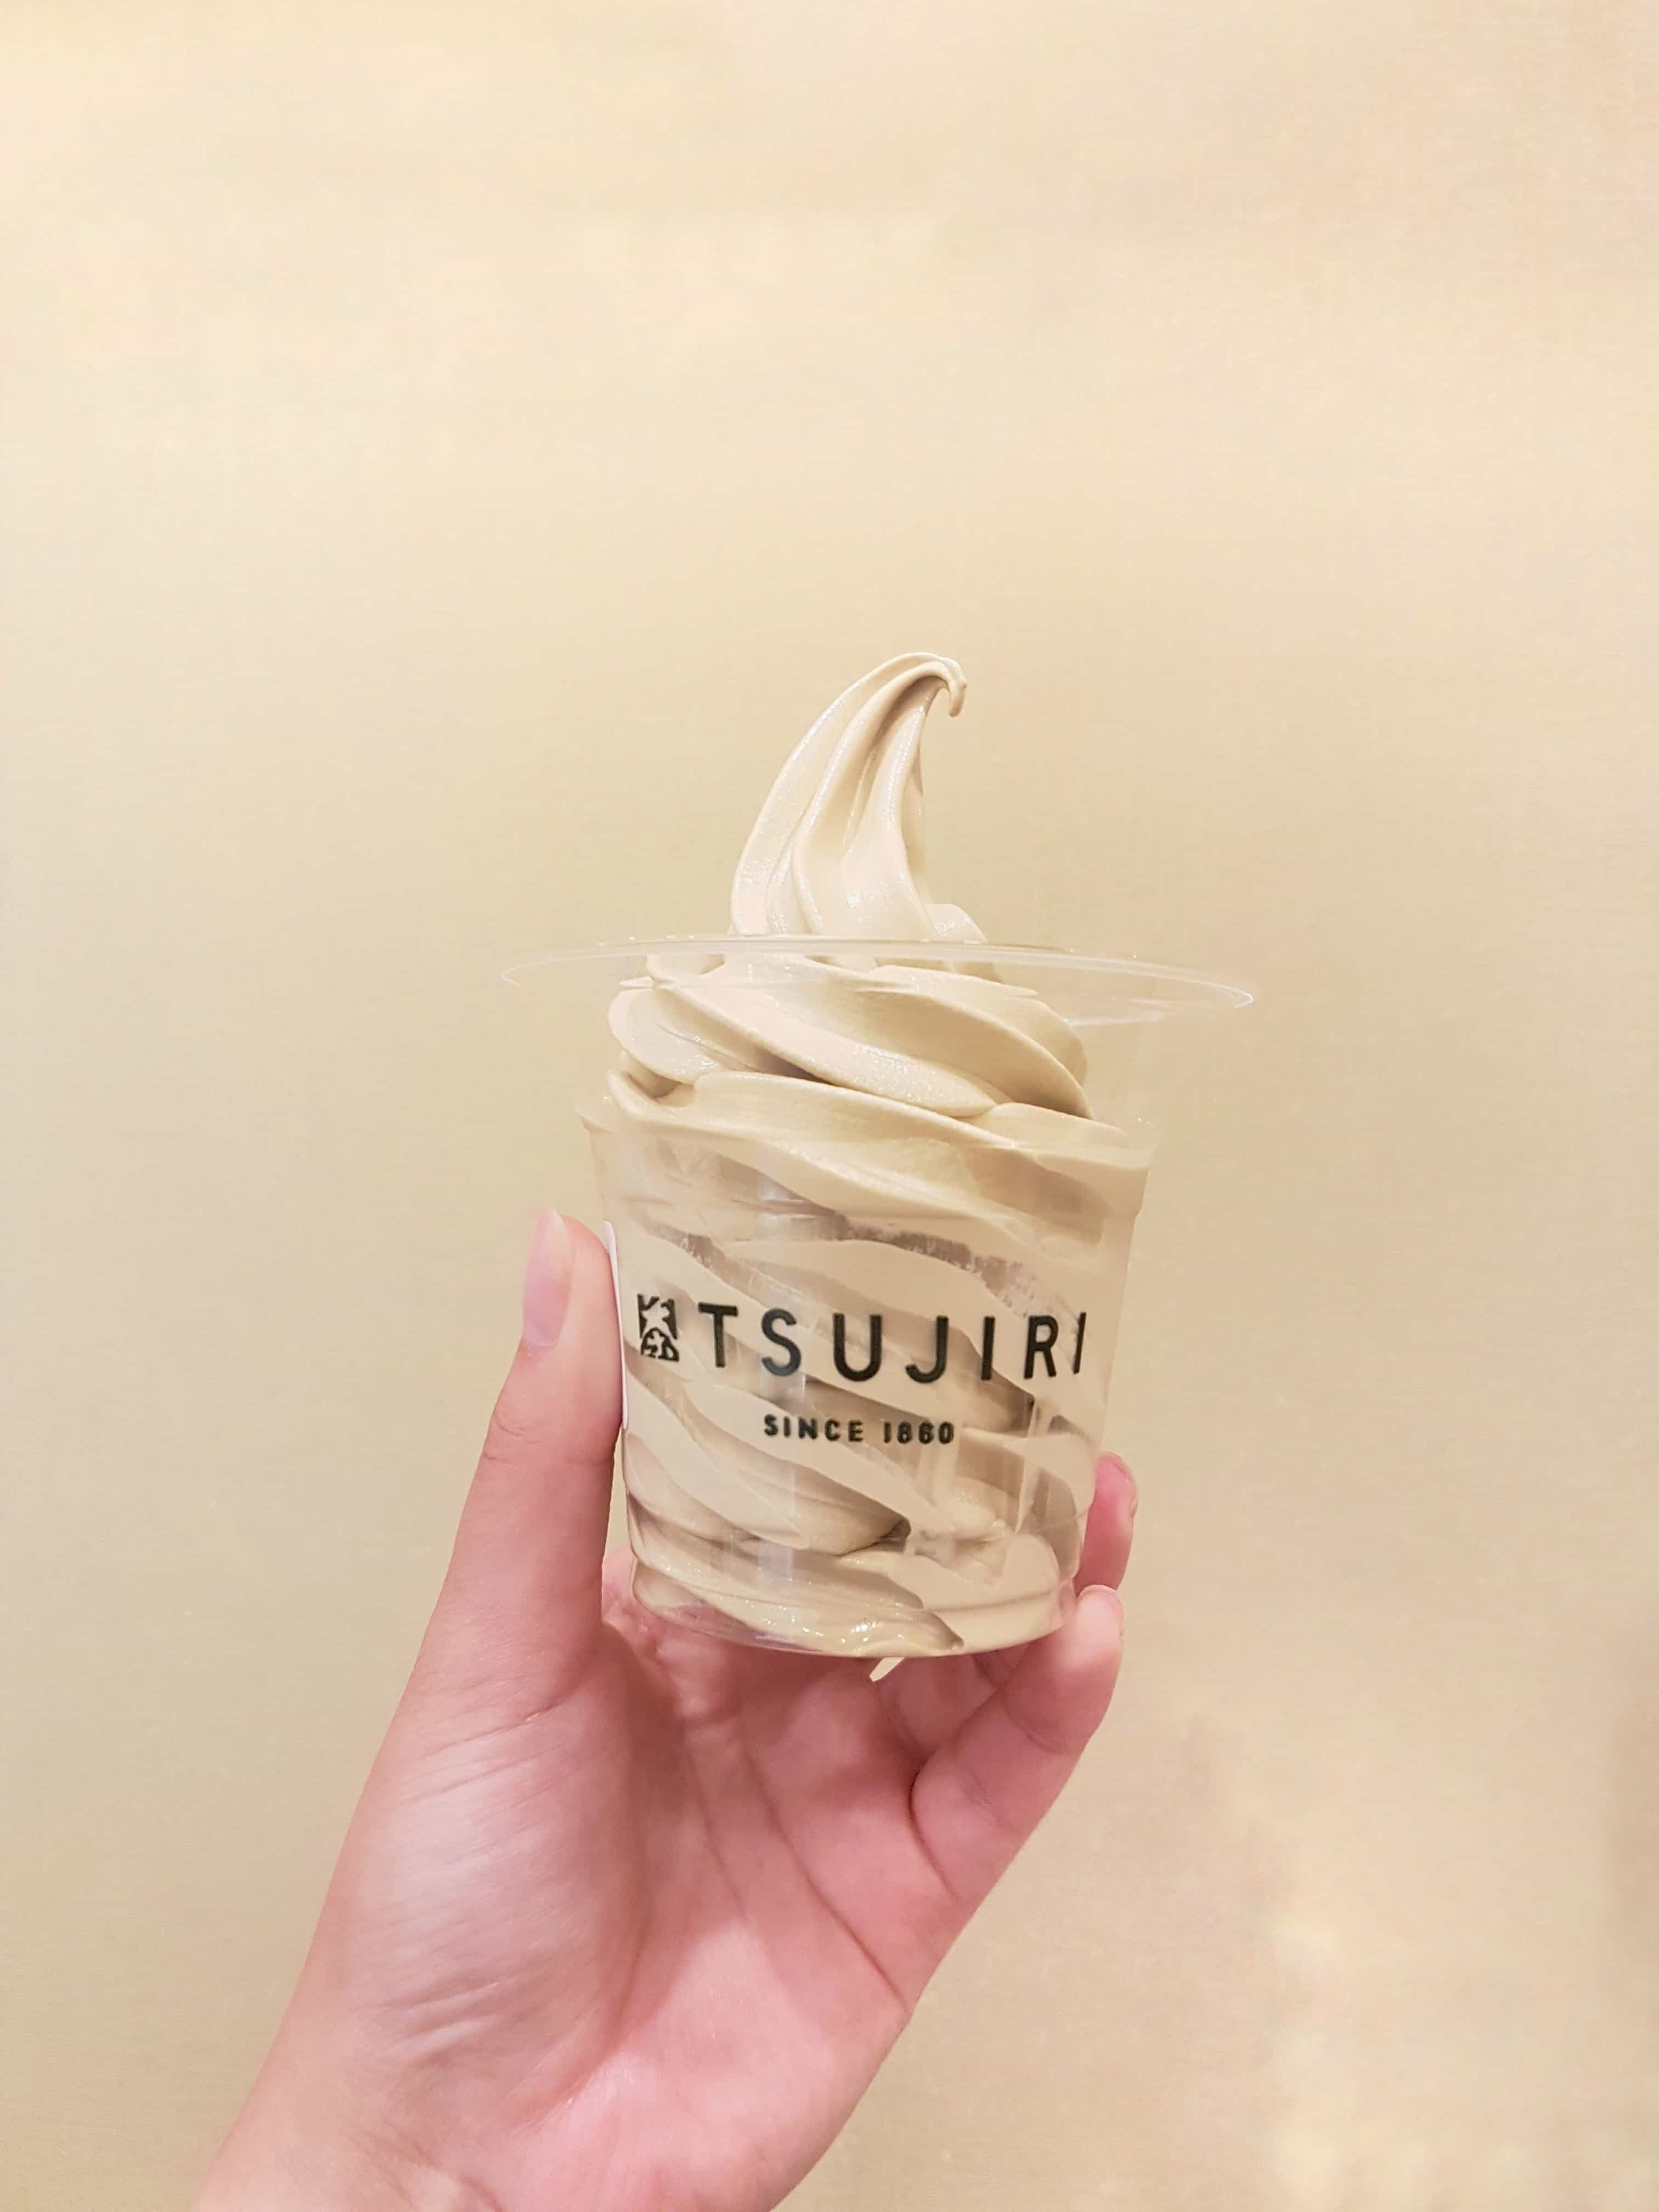 Looking for some delicious ice cream and gelato places in Toronto? Come take a look at my top picks!